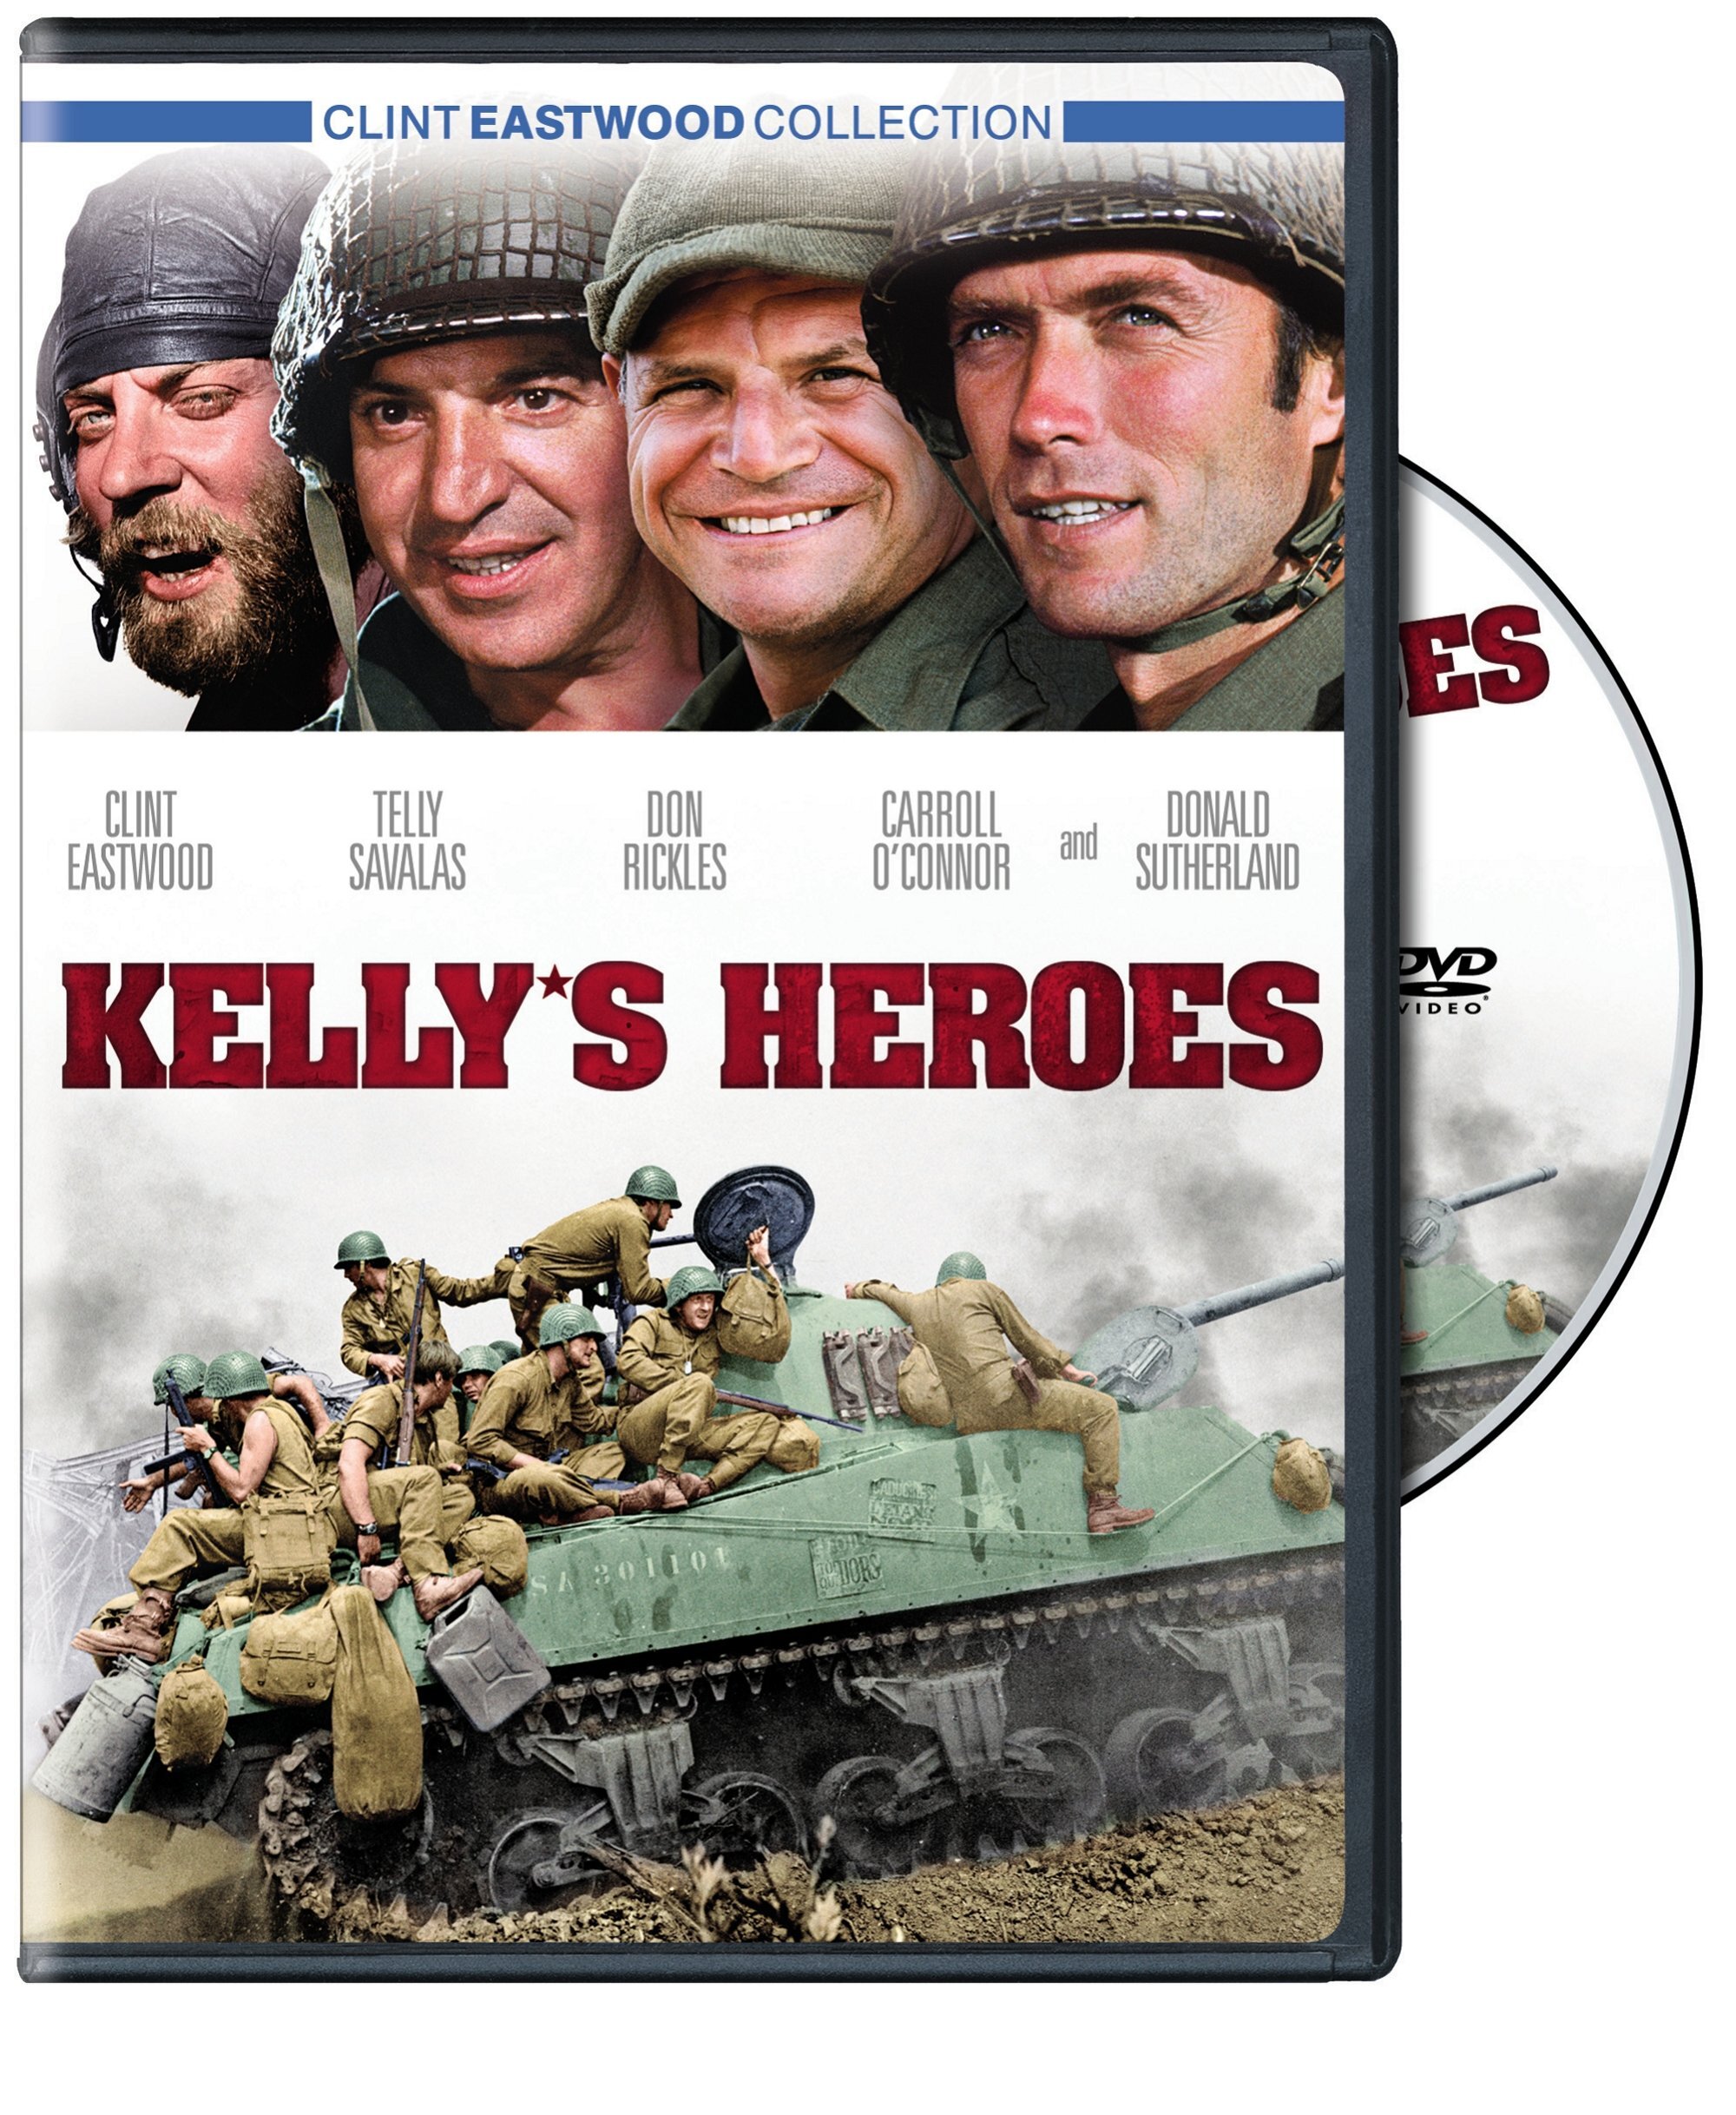 Kelly's Heroes (DVD Widescreen) - DVD [ 1970 ]  - War Movies On DVD - Movies On GRUV